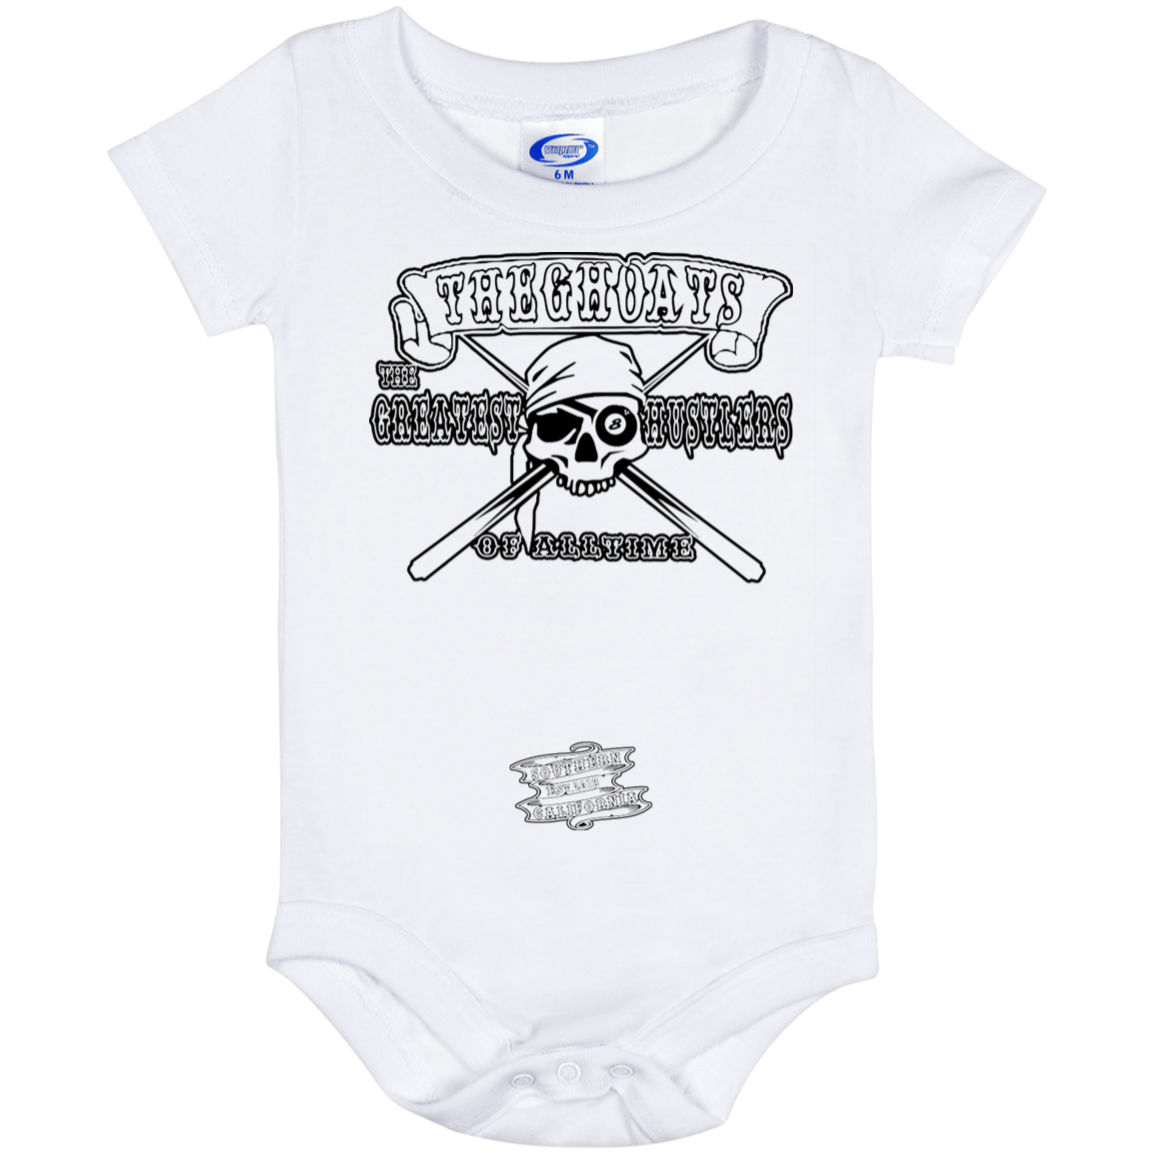 The GHOATS Custom Design. #4 Motorcycle Club Style. Ver 2/2. Baby Onesie 6 Month